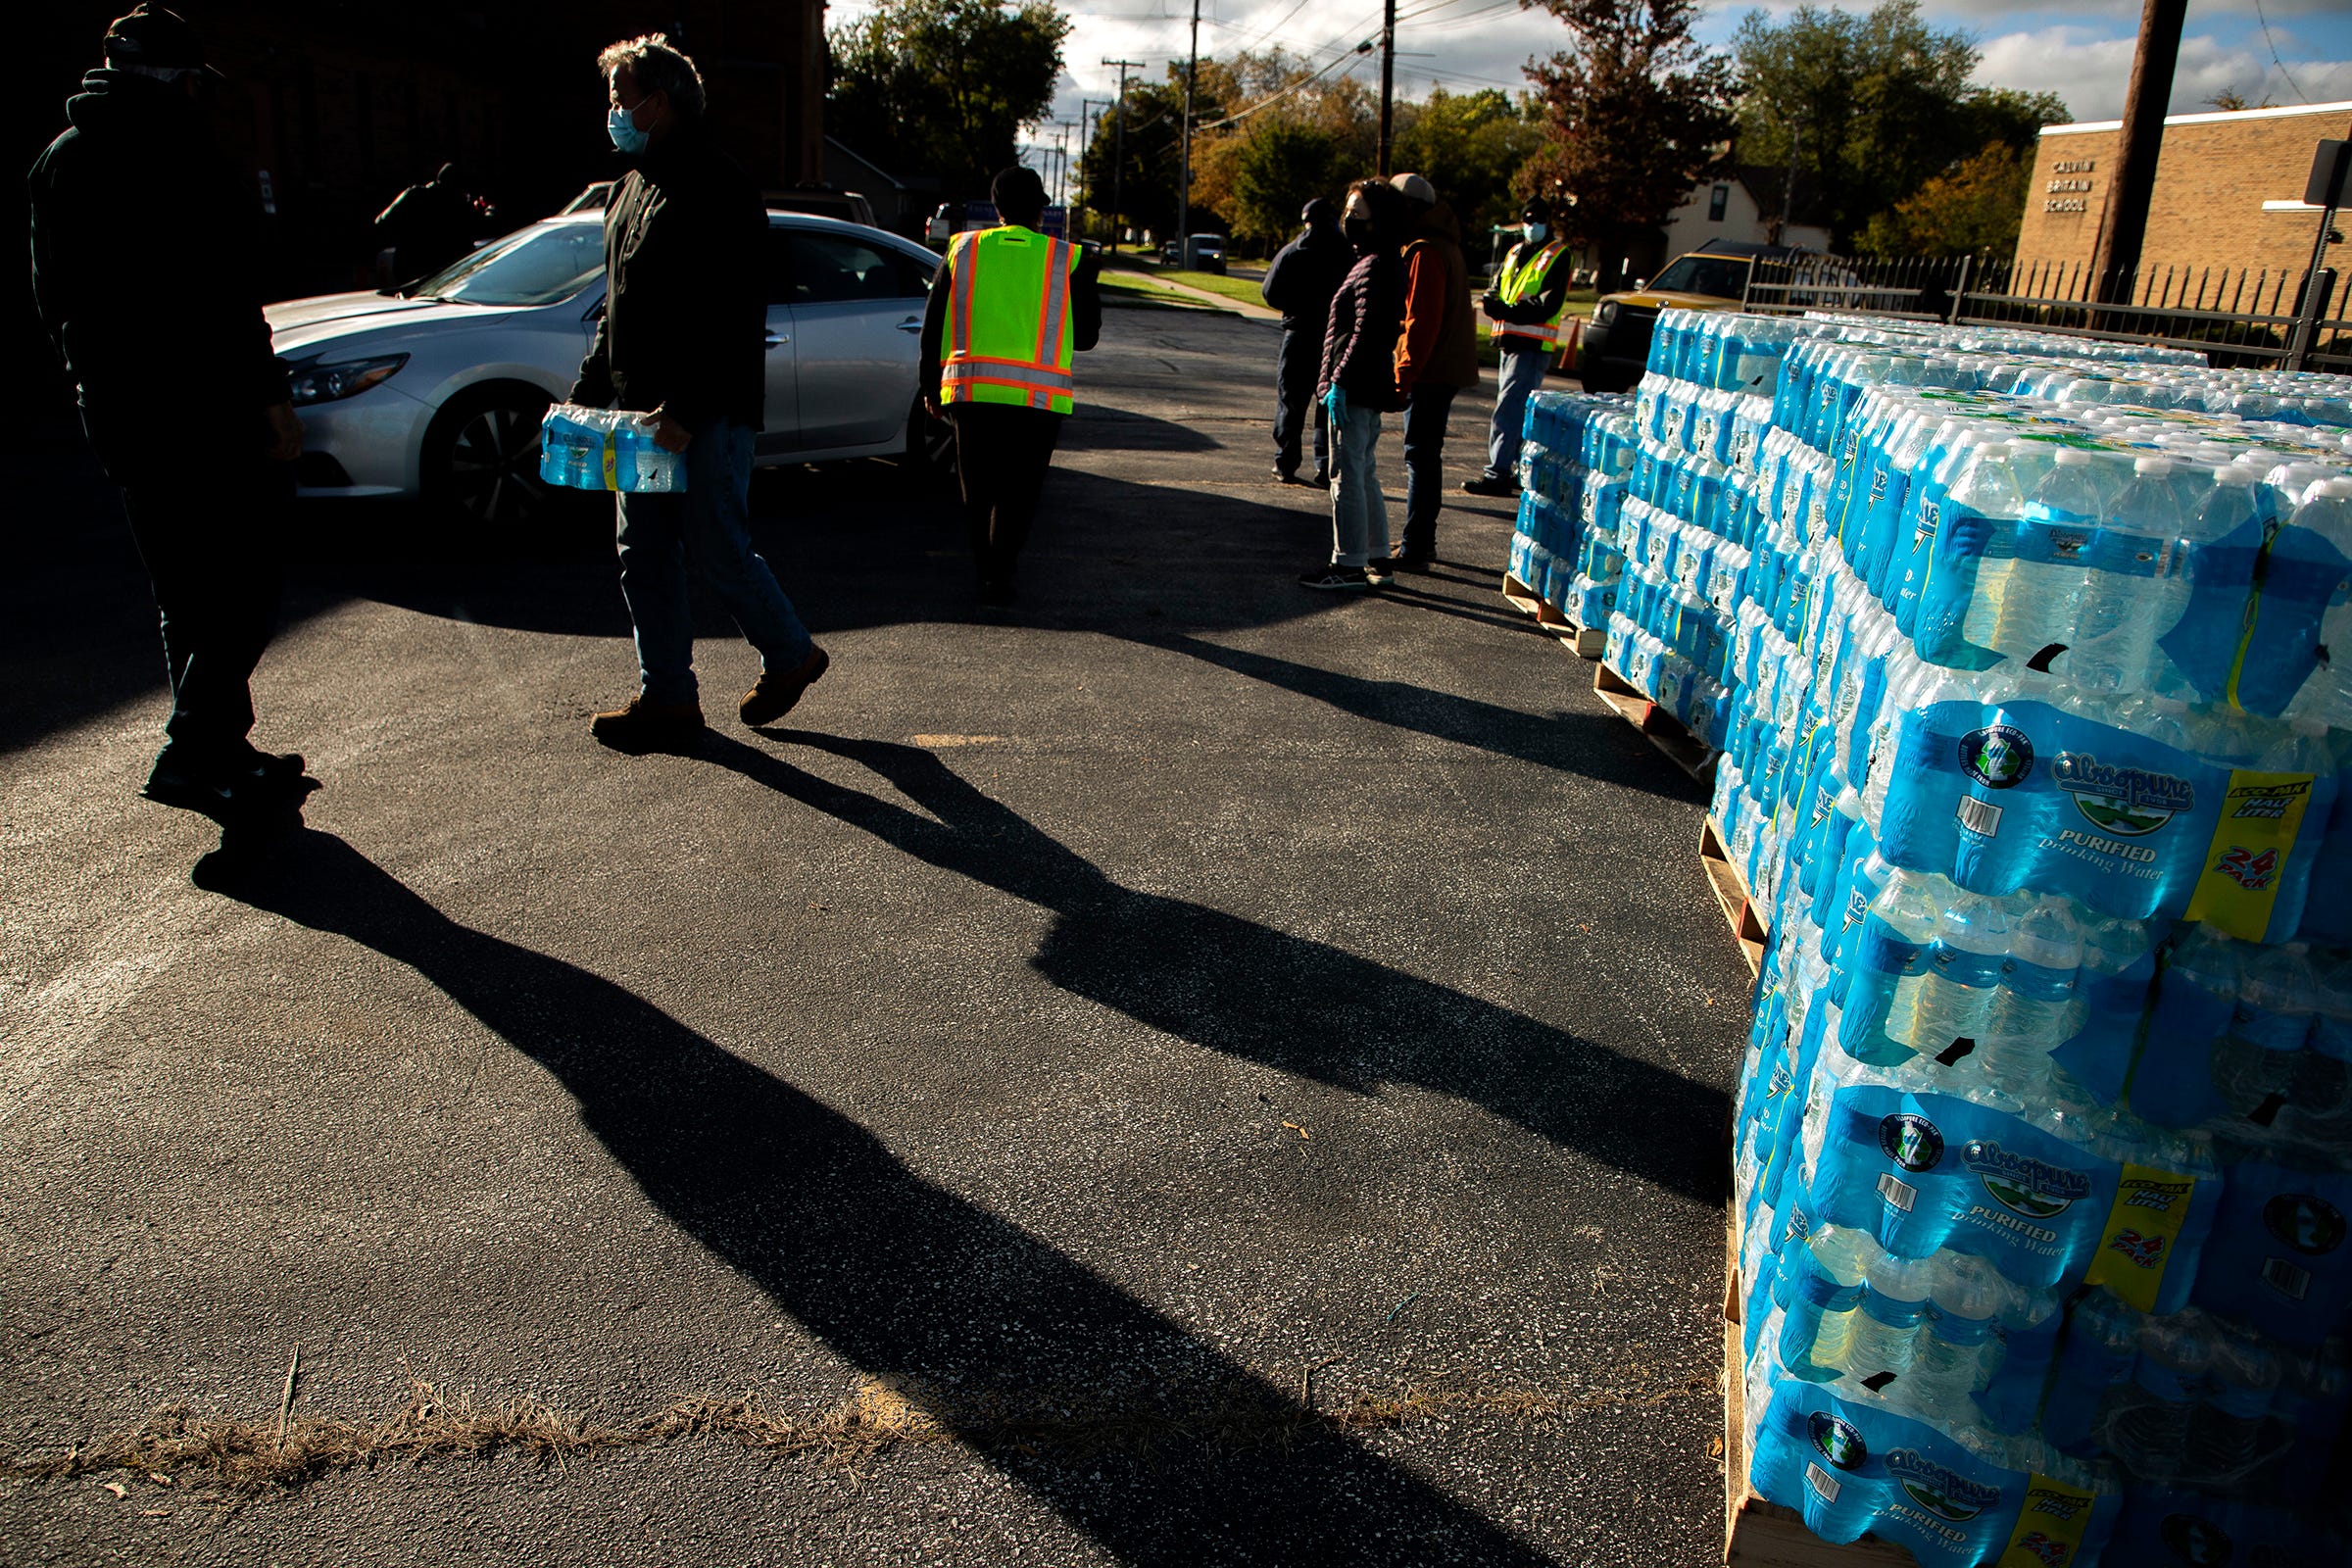 As the sun starts to set, volunteers continue to hand out bottled water to Benton Harbor residents at the Ebenezer Baptist Church on Britain Avenue on October 26, 2021. The church is one of several locations where residents can come to get bottled water to use since their water supply has been found unsafe due to lead levels. Recently, Gov. Whitmer has called for spending $20 million in Benton Harbor to replace nearly 6,000 service lines, most suspected of containing lead, within five years.